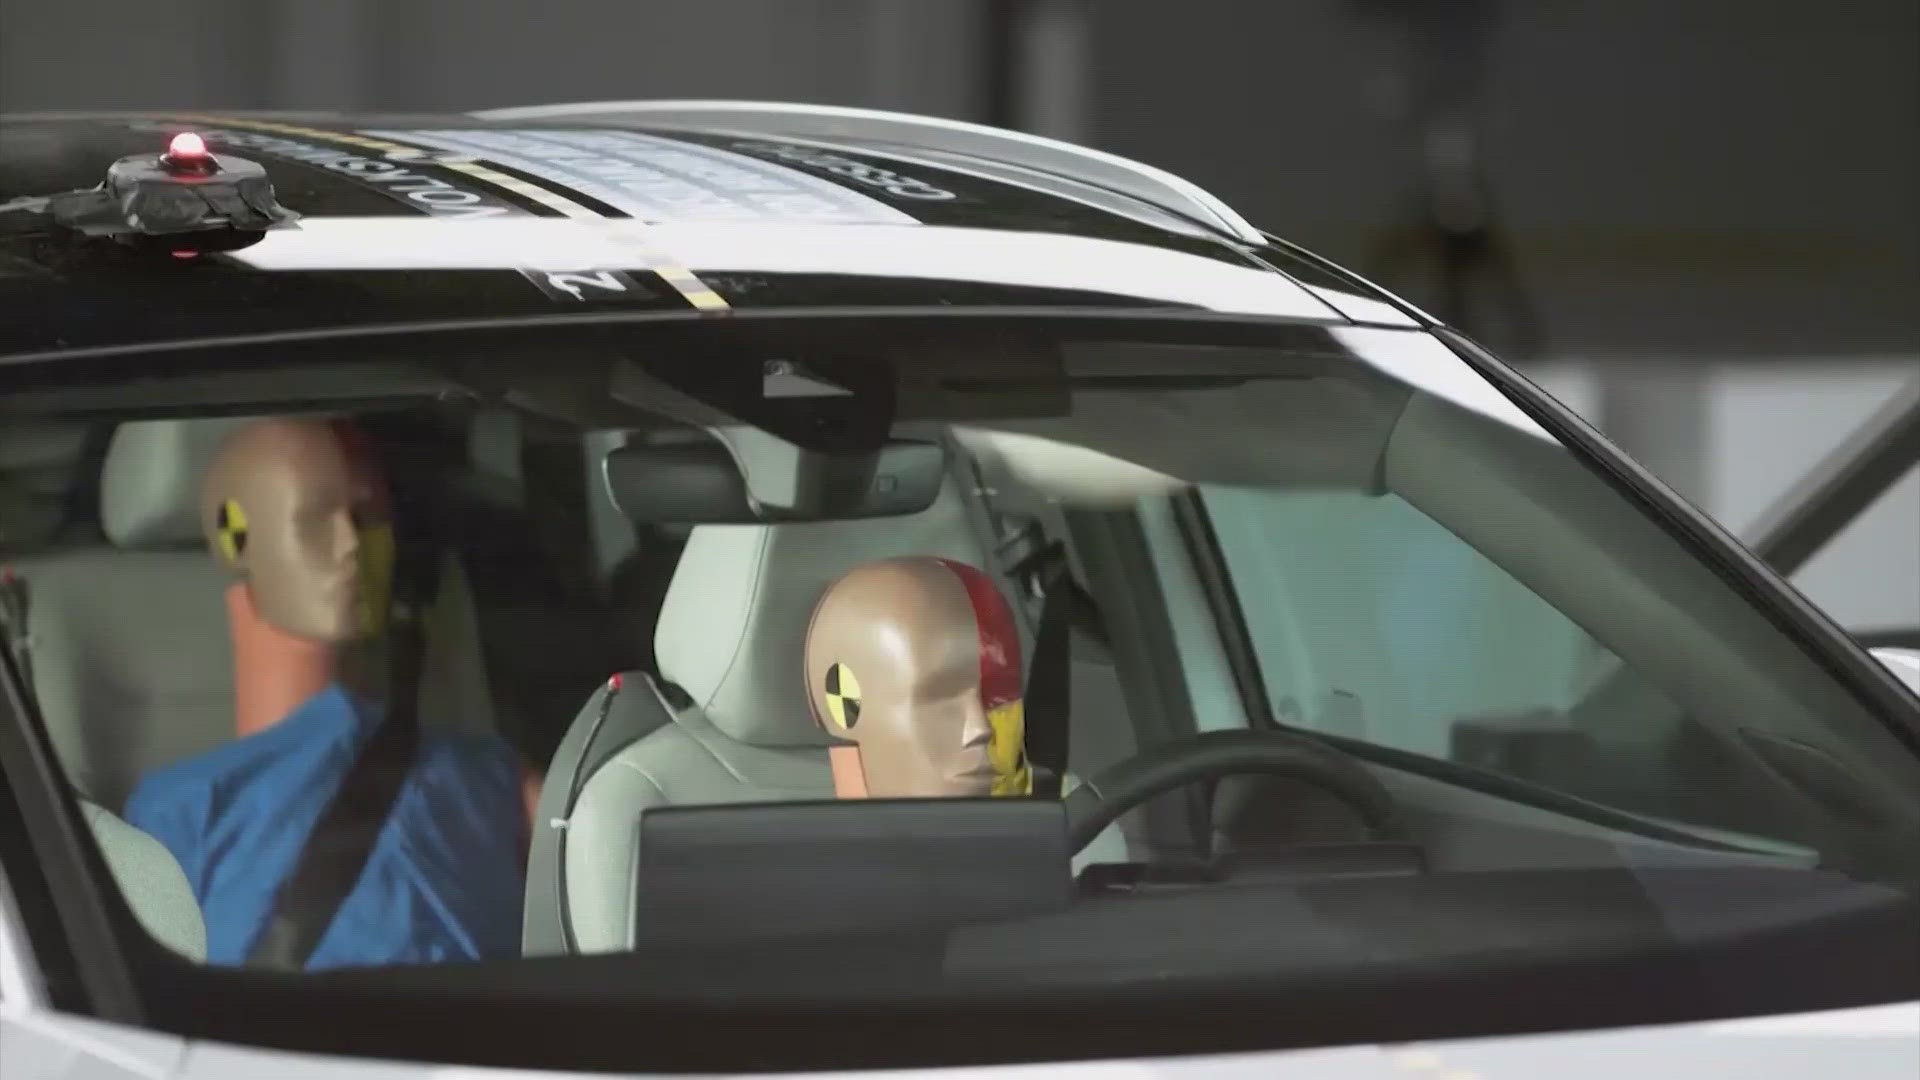 The new report is calling out the lack of diversity in crash test dummies saying it could cost people their lives.